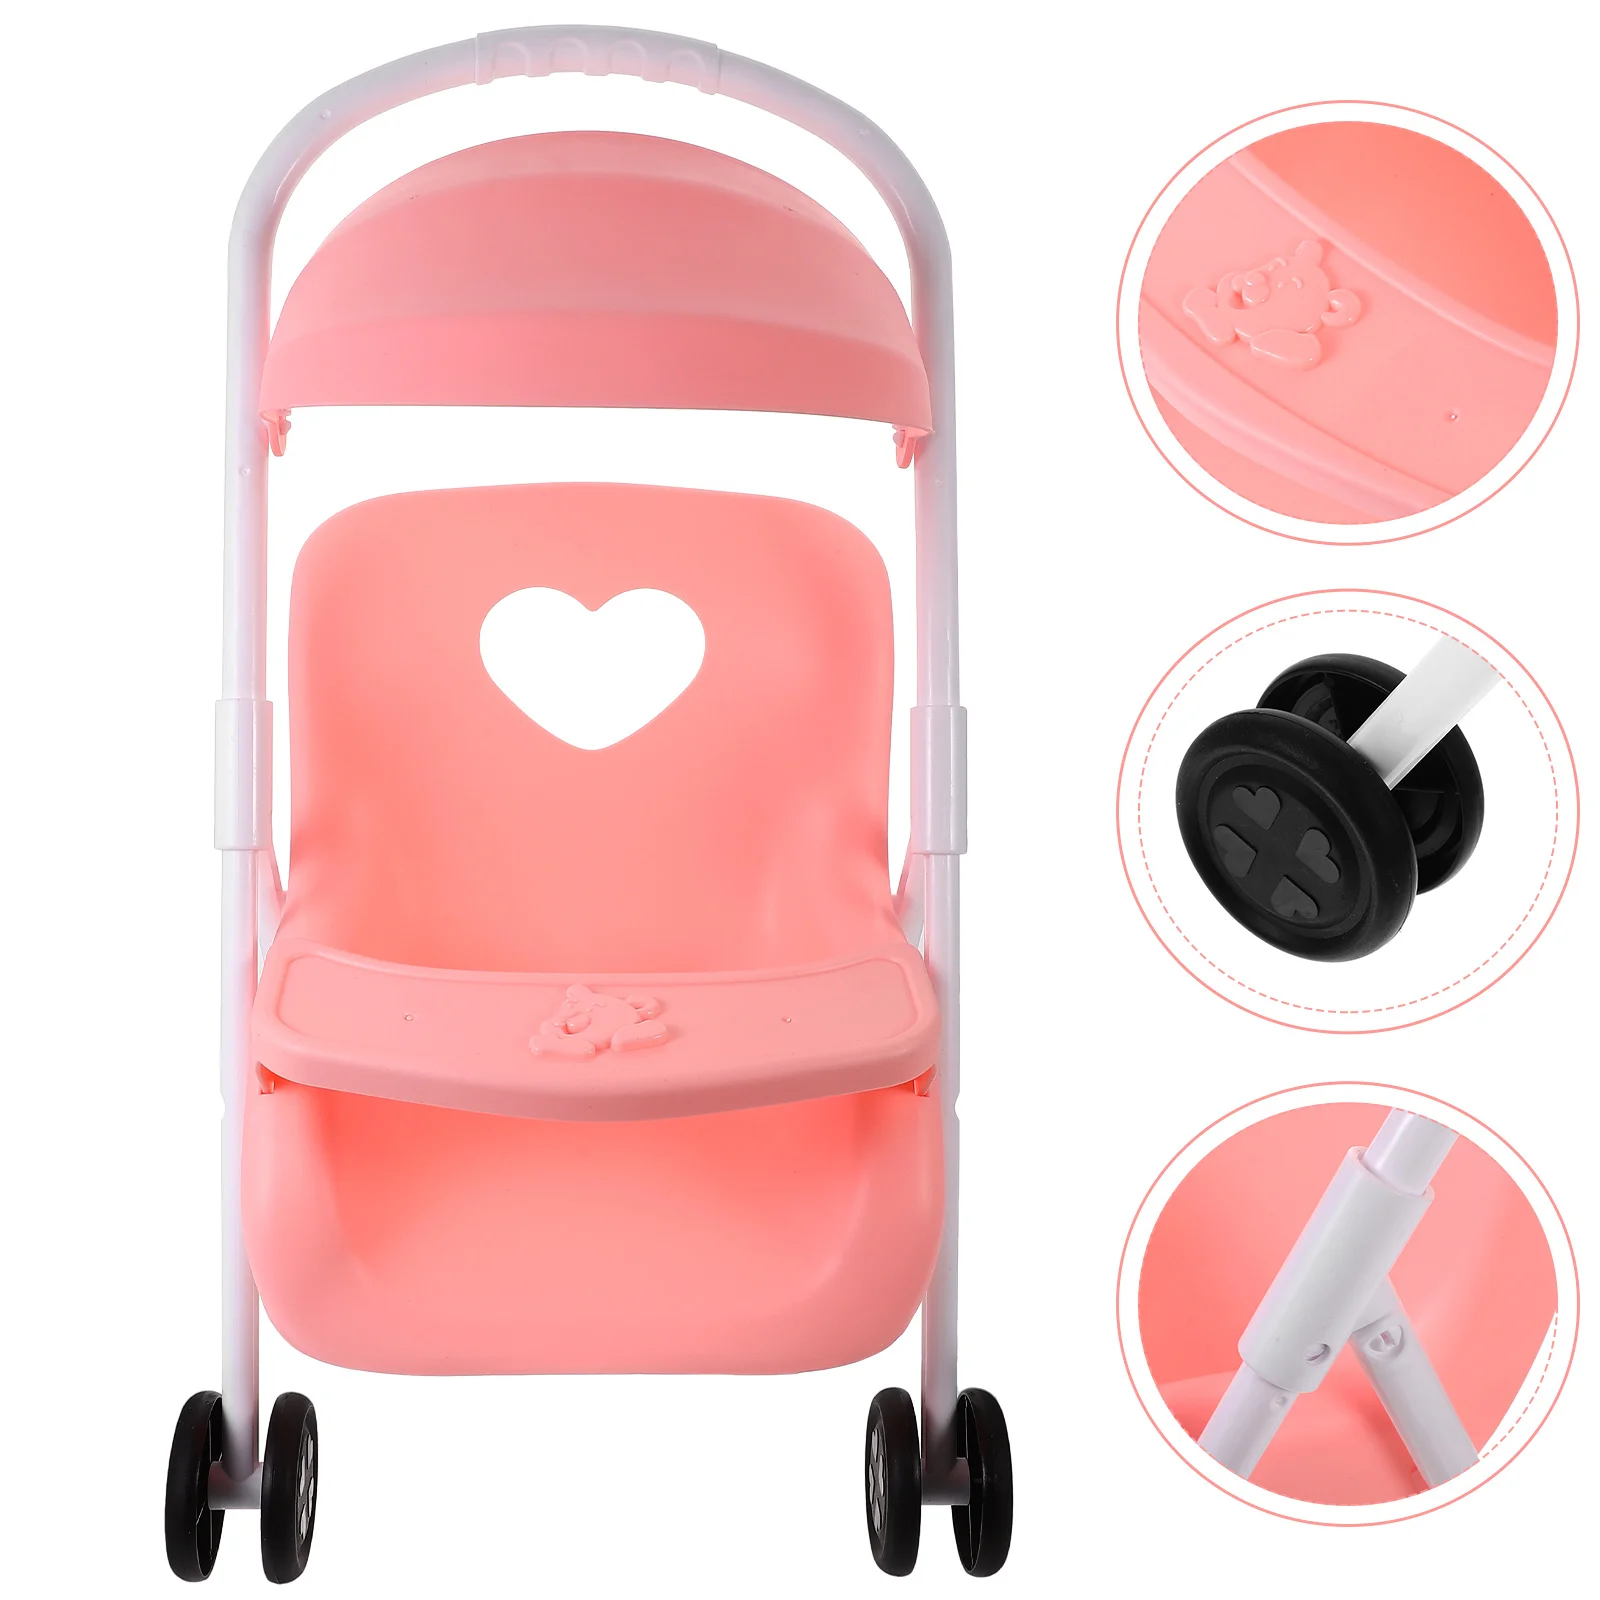 Doll Stroller Play Game Doll Stroller Simulated Play Game Stroller Furniture Adornment Children Role Playing Game for Dollhouse 3 6 years old children s electric car electric motorcycle tricycle stroller truck rechargeable baby kids gift toy